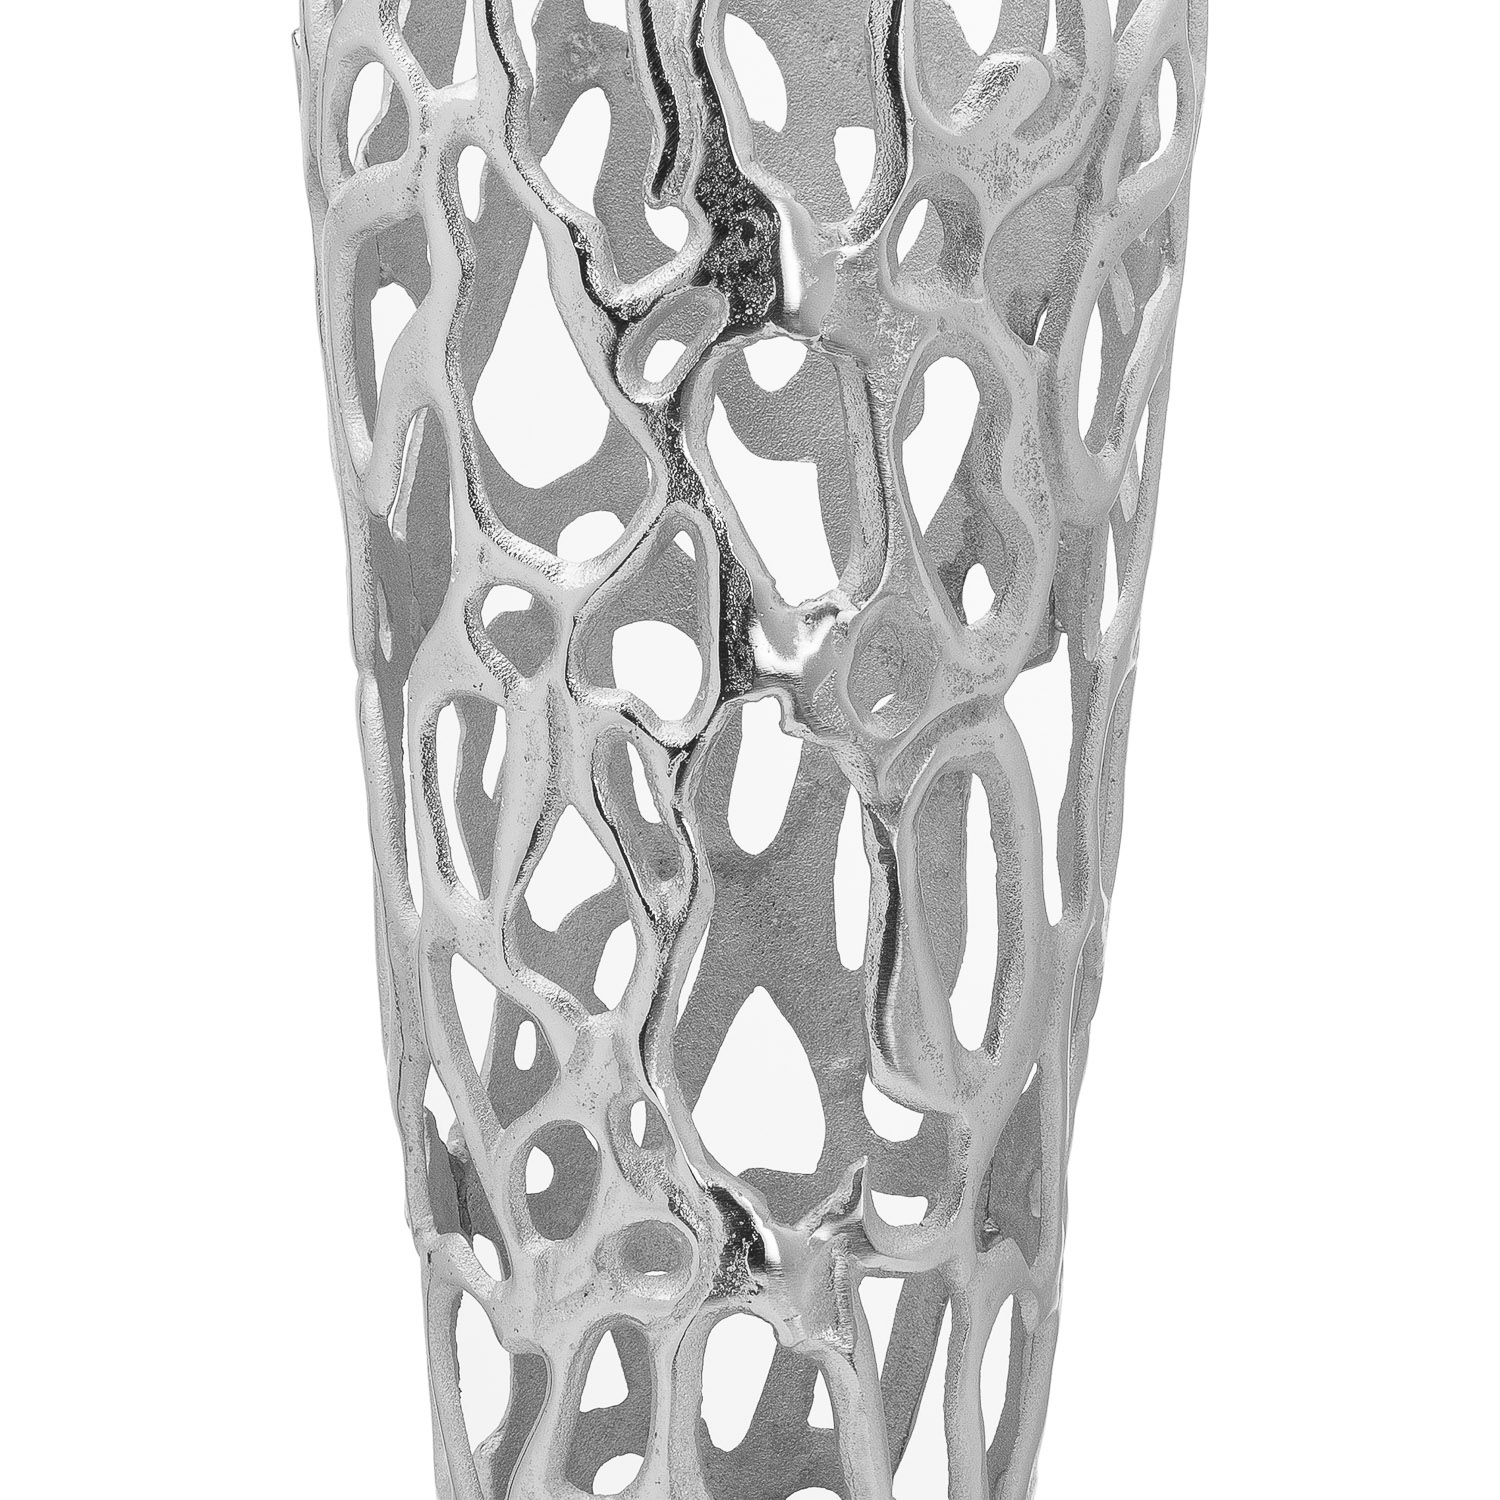 Ohlson Silver Large Perforated Coral Inspired Vase - Image 2